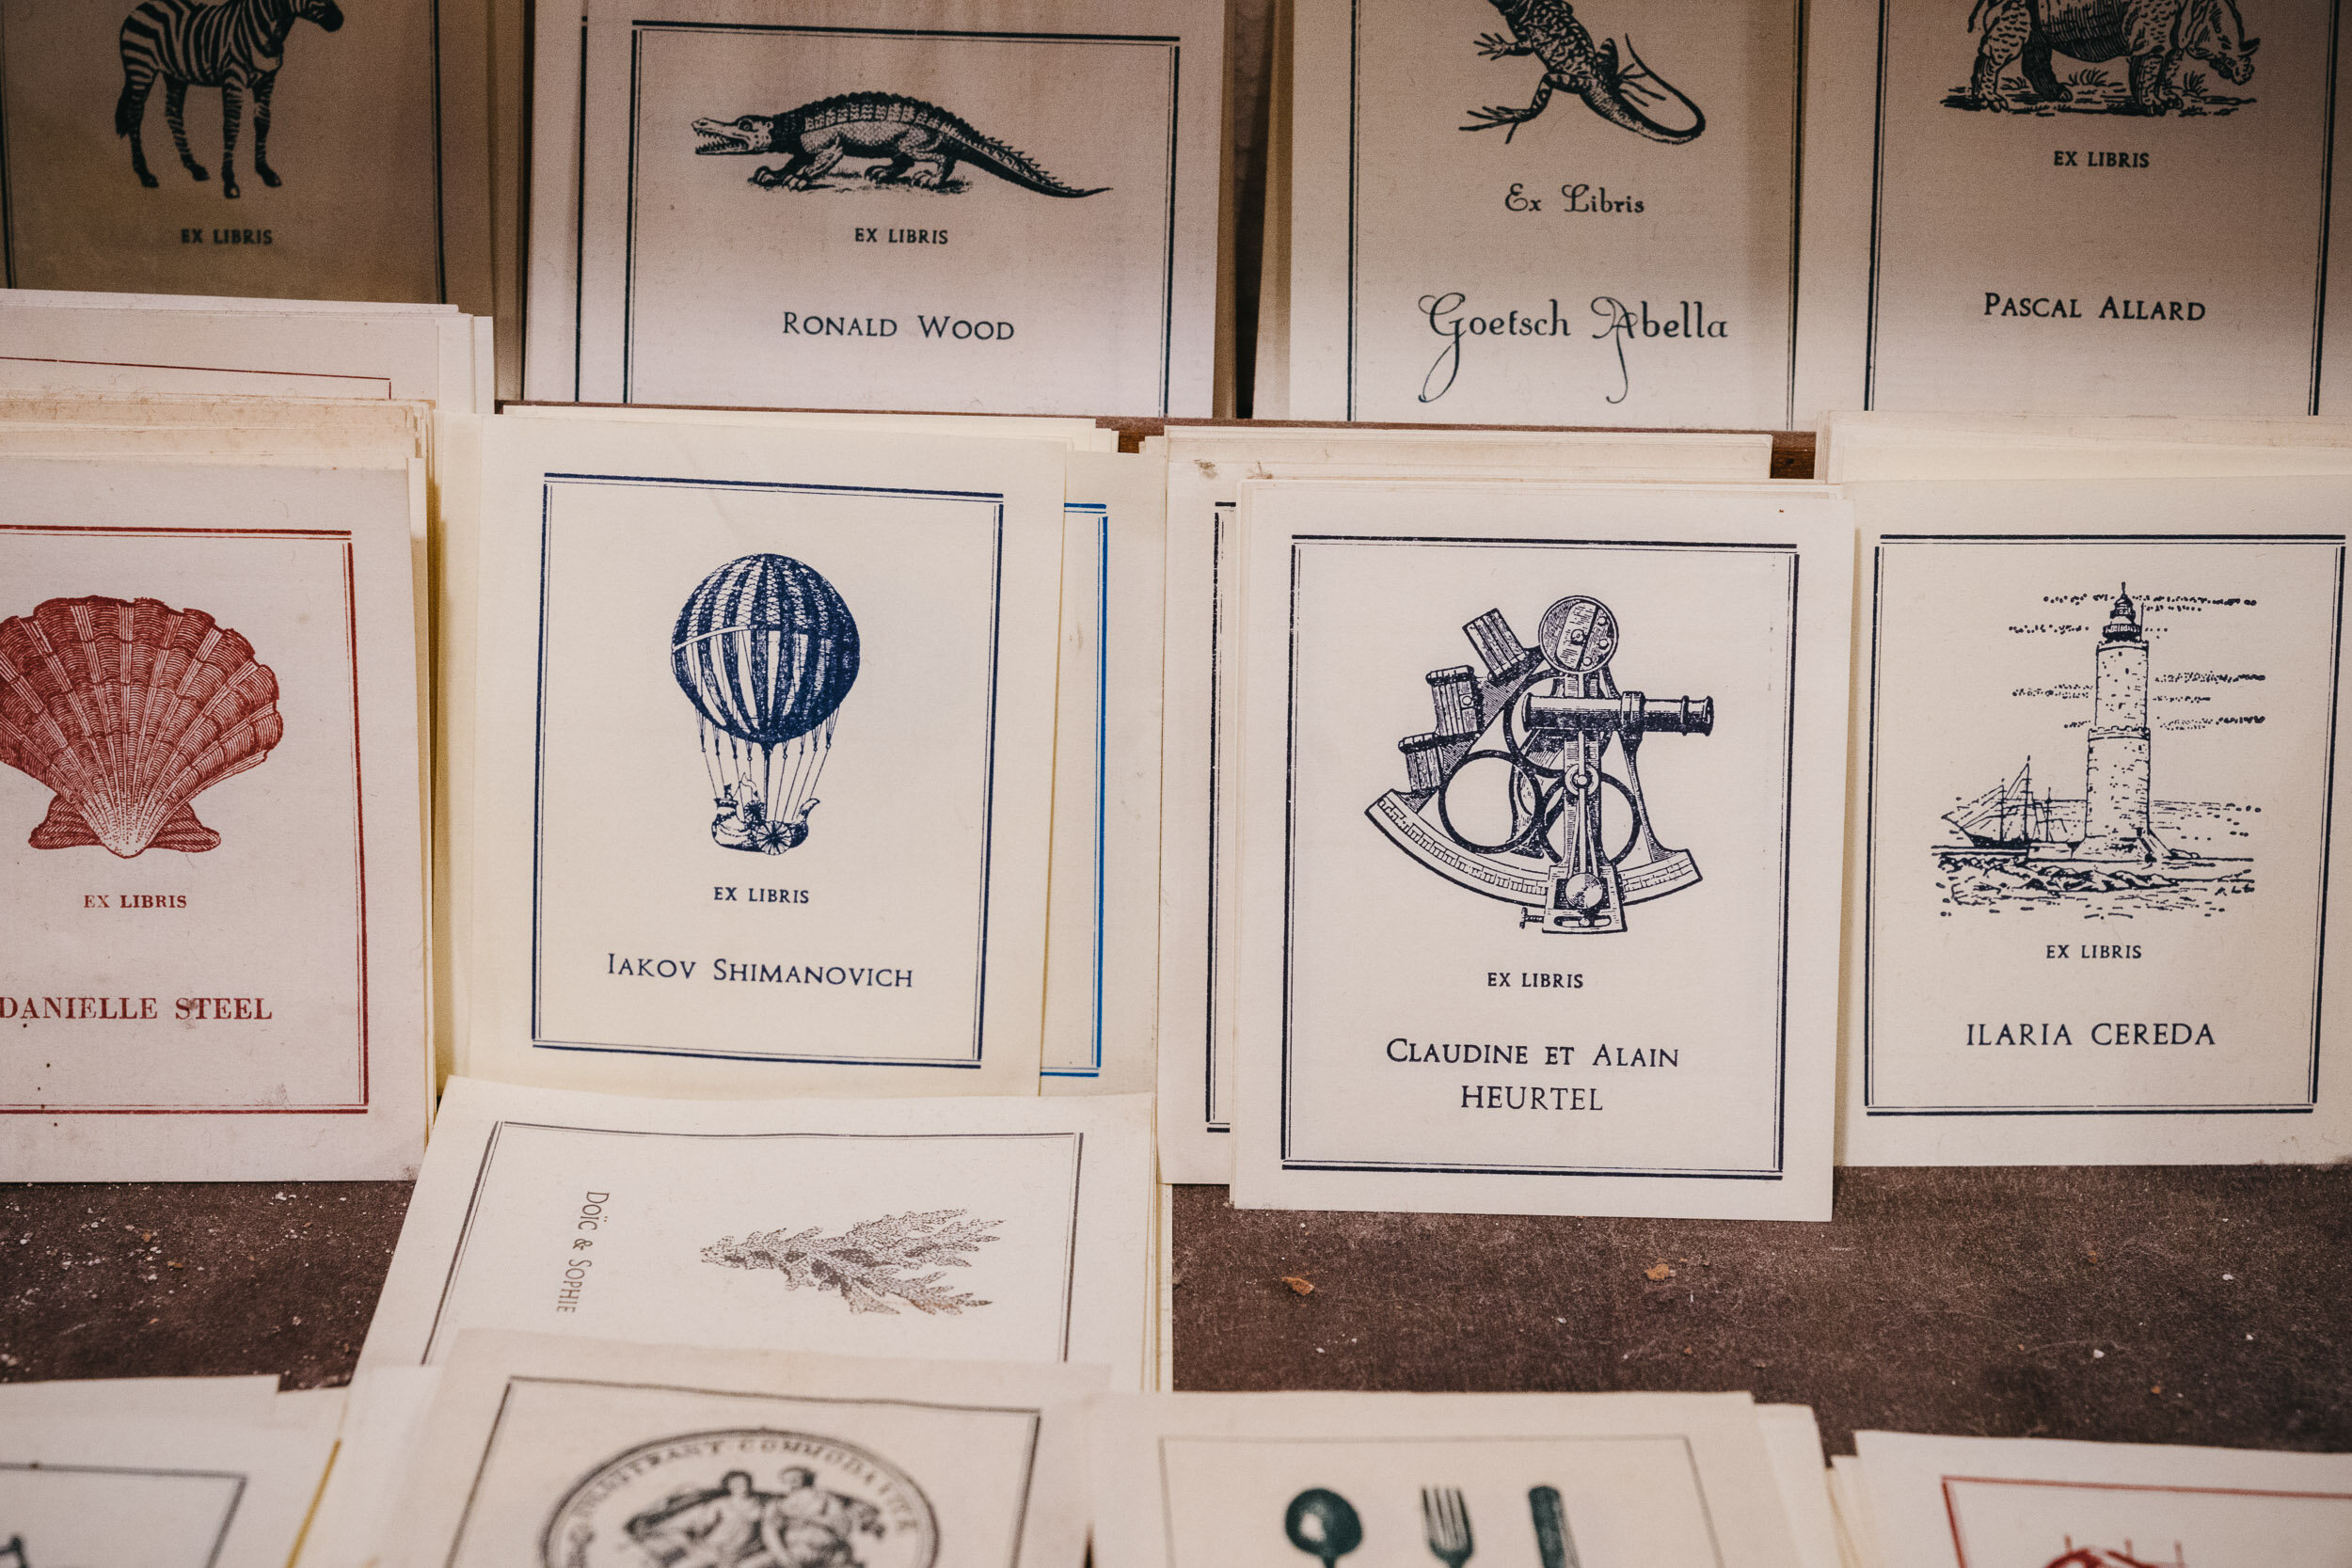  The names of some of Gianni’s clients and the designs they have used for their stationary 